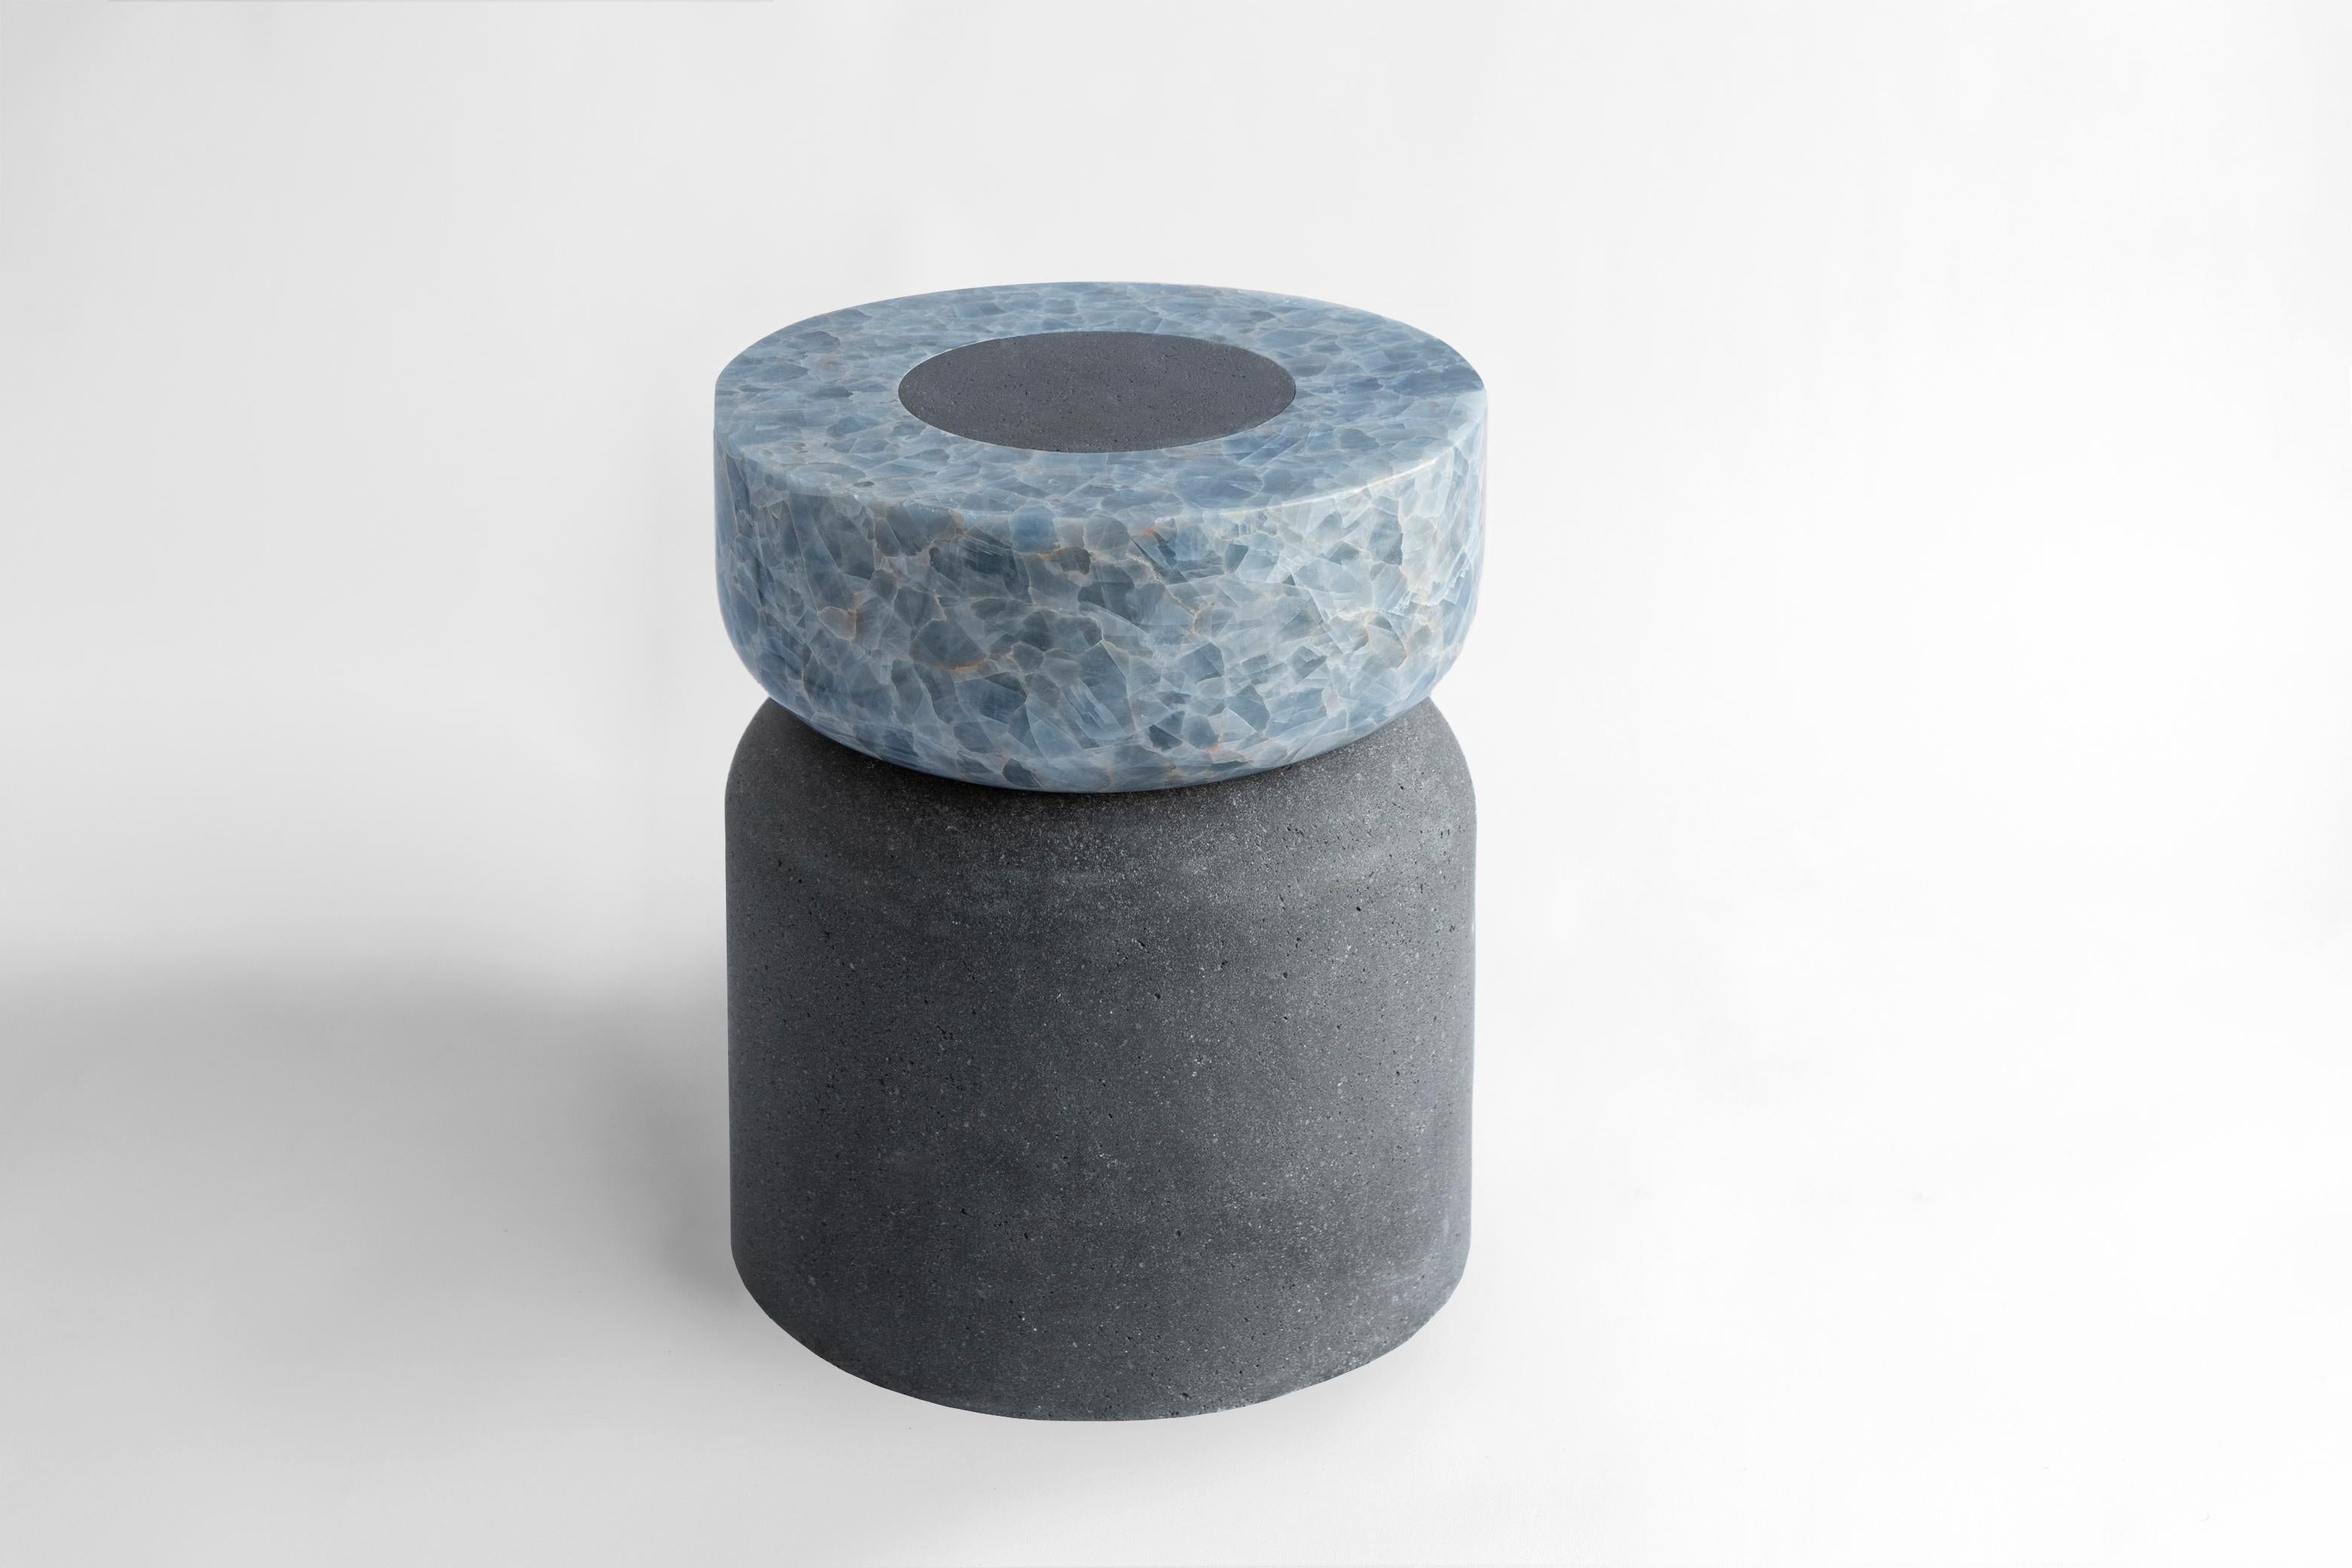 Stone Volcanic Shade IV Stool/Table by Sten Studio, Represented by Tuleste Factory For Sale